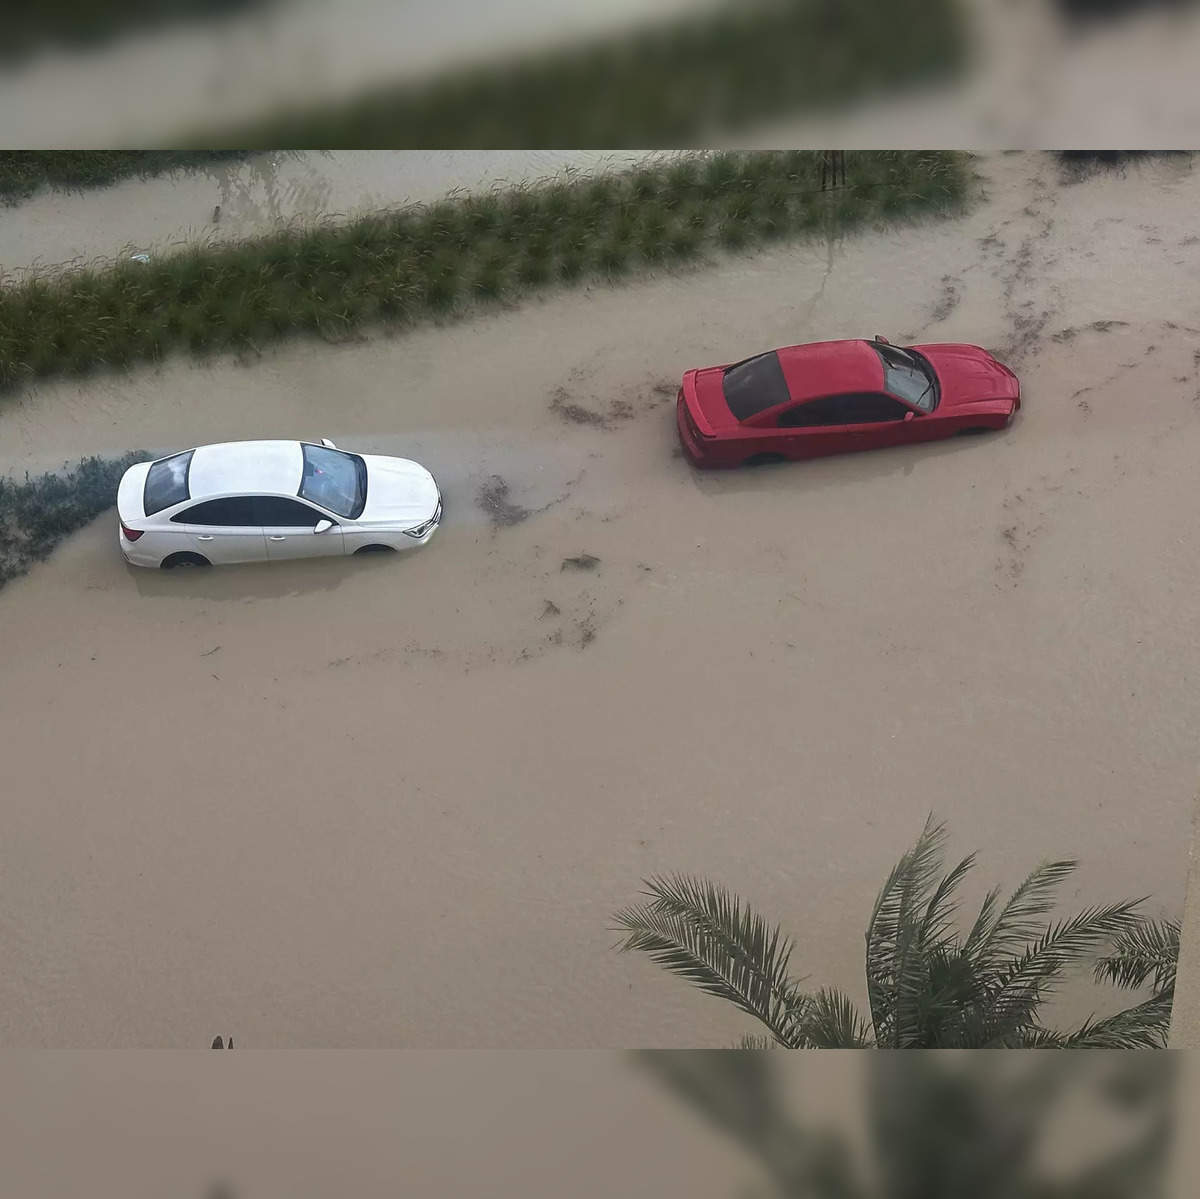 Dubai Flood: Dubai's wettest day in history: 1.5 years of rain in 24 hours.  What's behind UAE's record rainfall? - The Economic Times